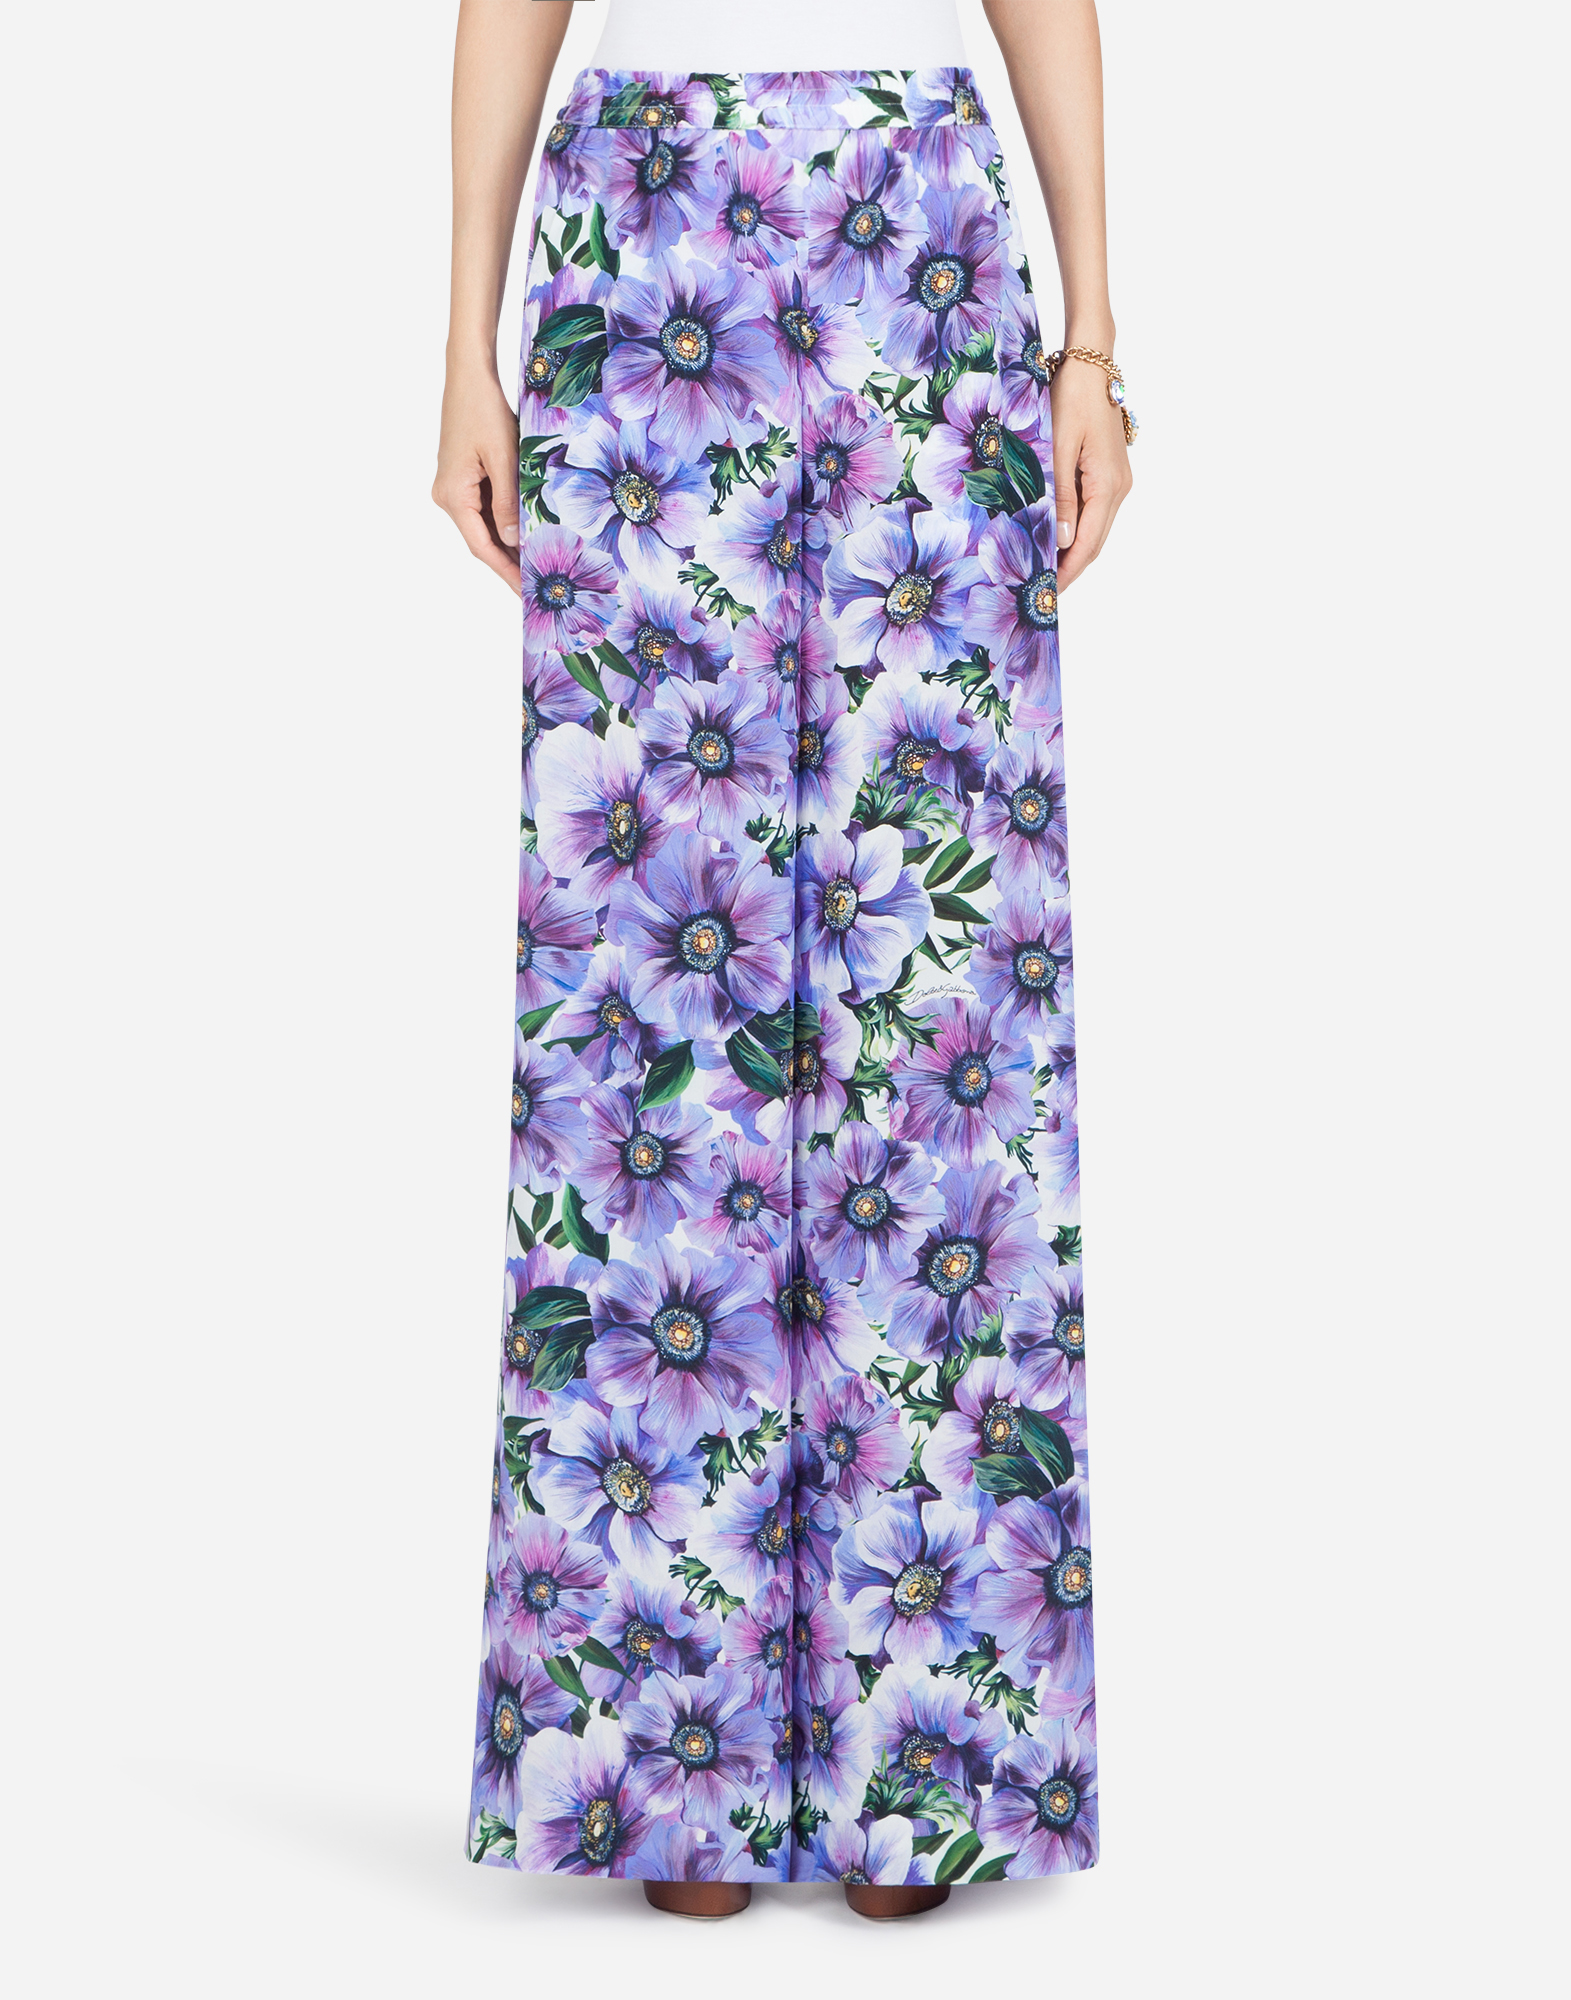 DOLCE & GABBANA FLARED PANTS IN ANEMONE-PRINT CREPE DE CHINE